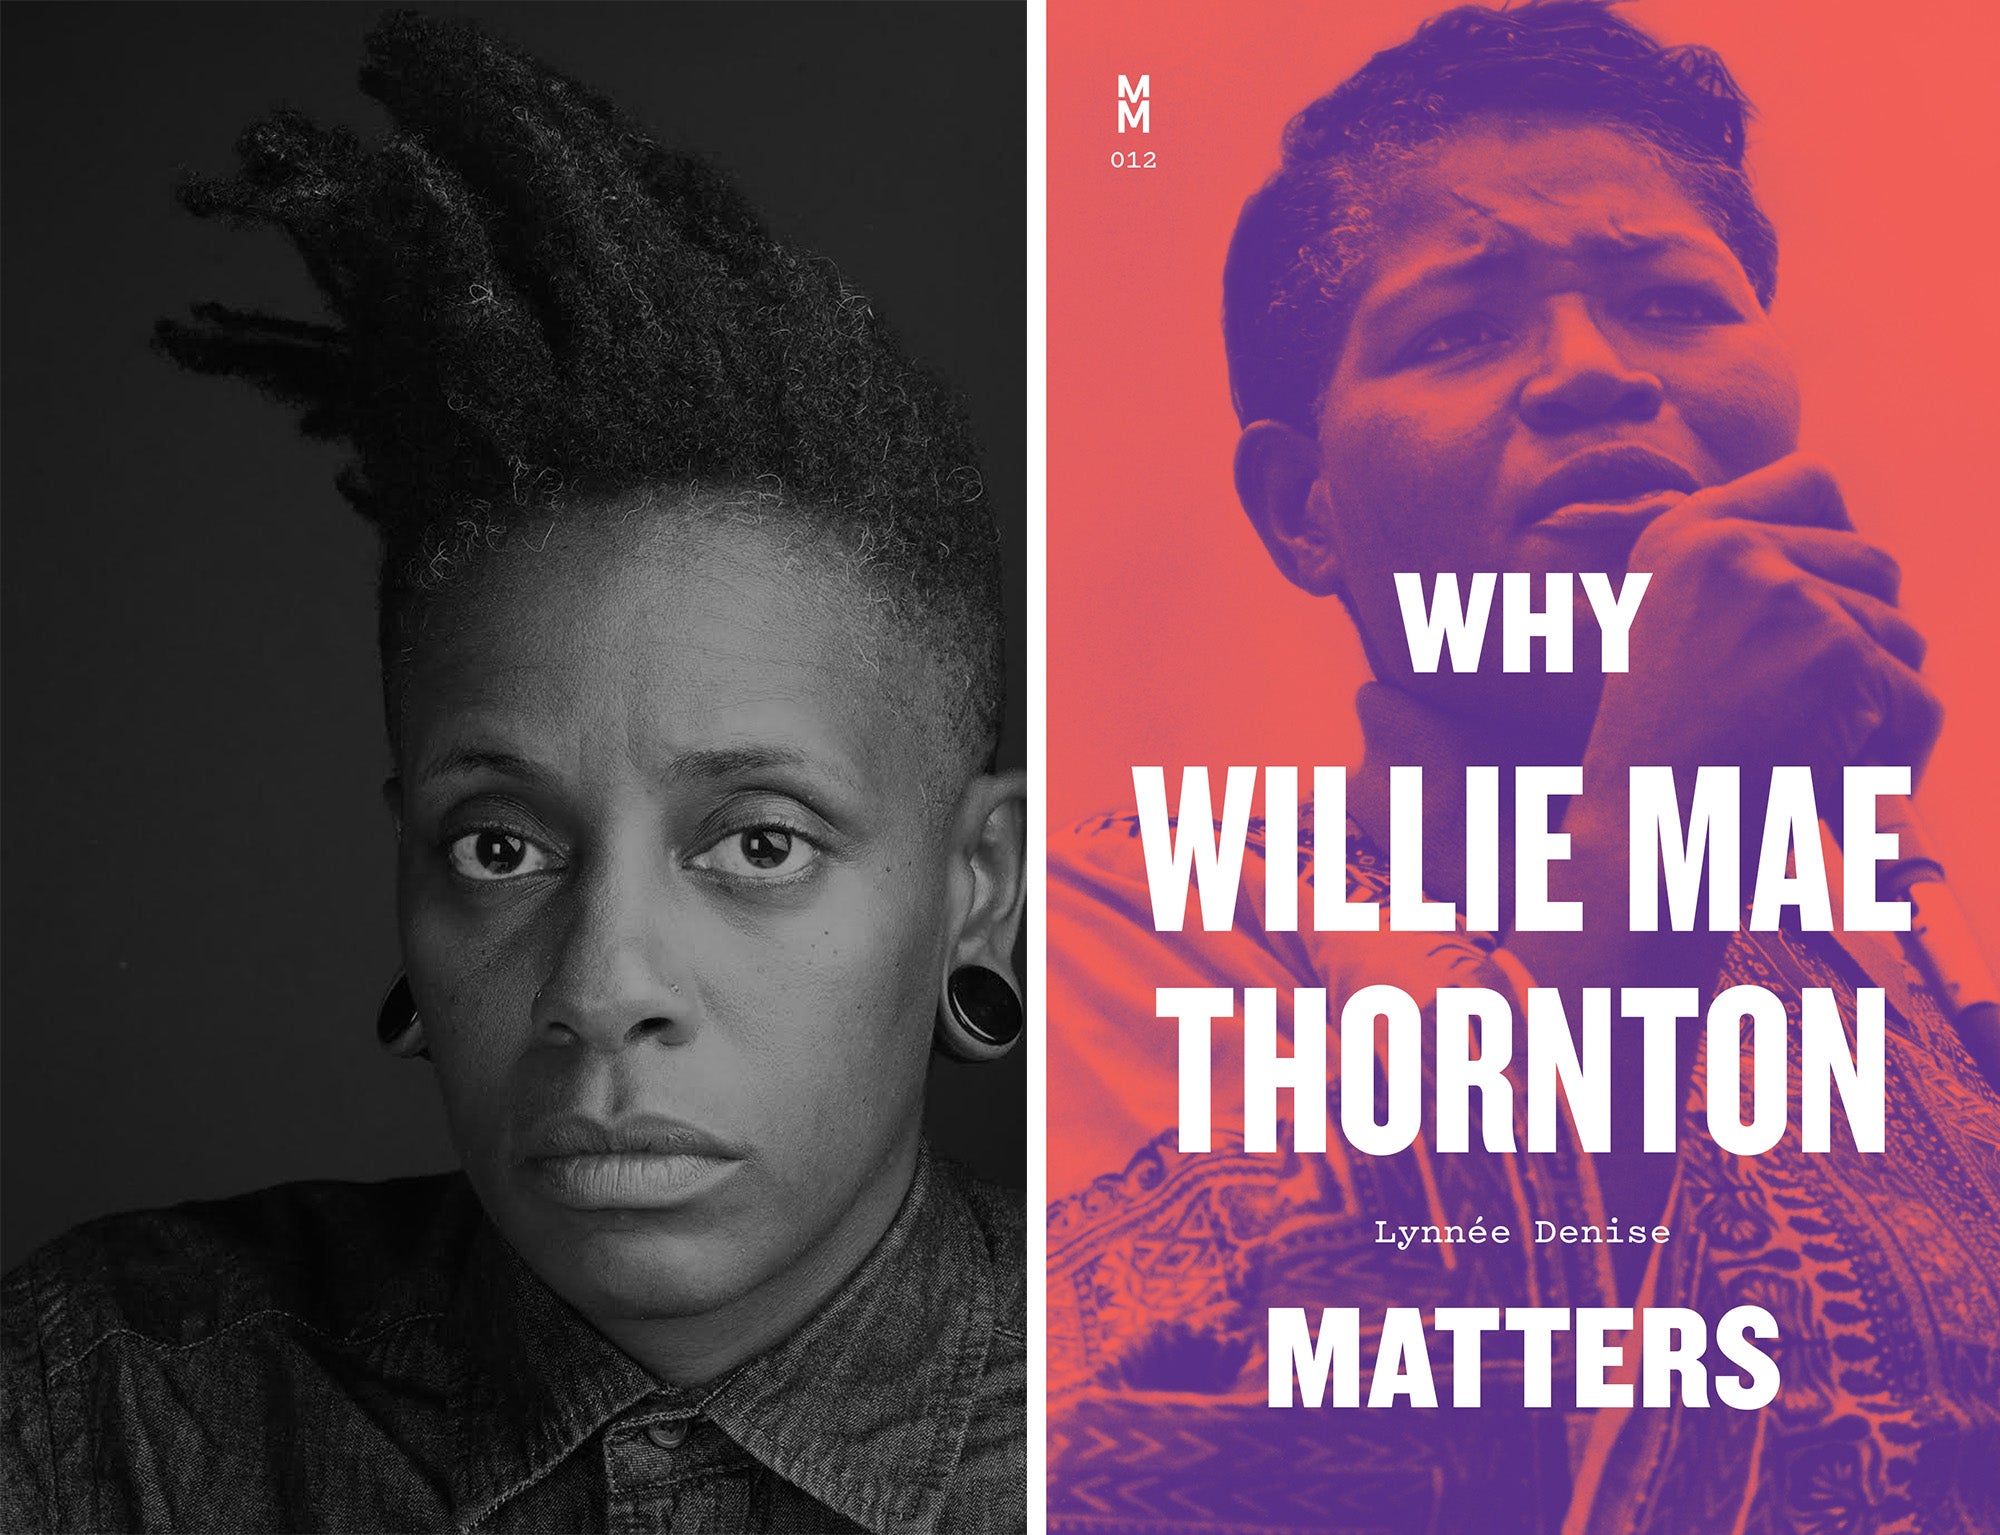 Lynnée Denise and the cover of "Why Willie Mae Thornton Matters"